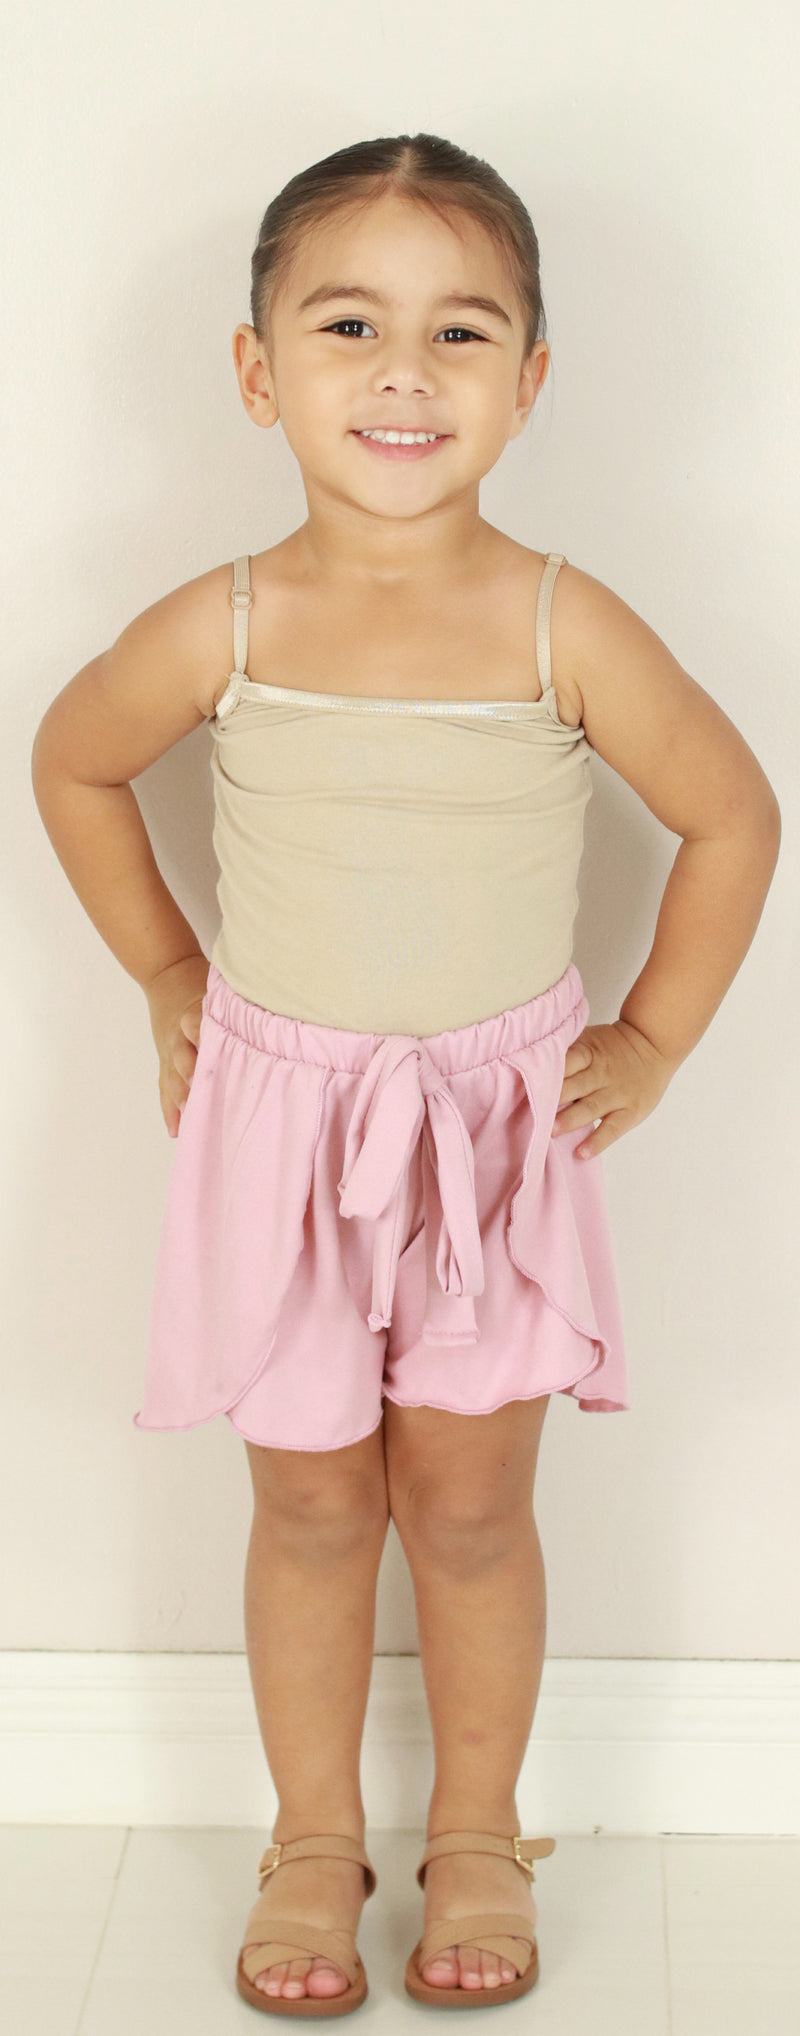 Jeans Warehouse Hawaii - NON DENIM SHORTS 2T-4T - TRY IT OUT SHORTS | KIDS SIZE 2T-4T | By LUZ